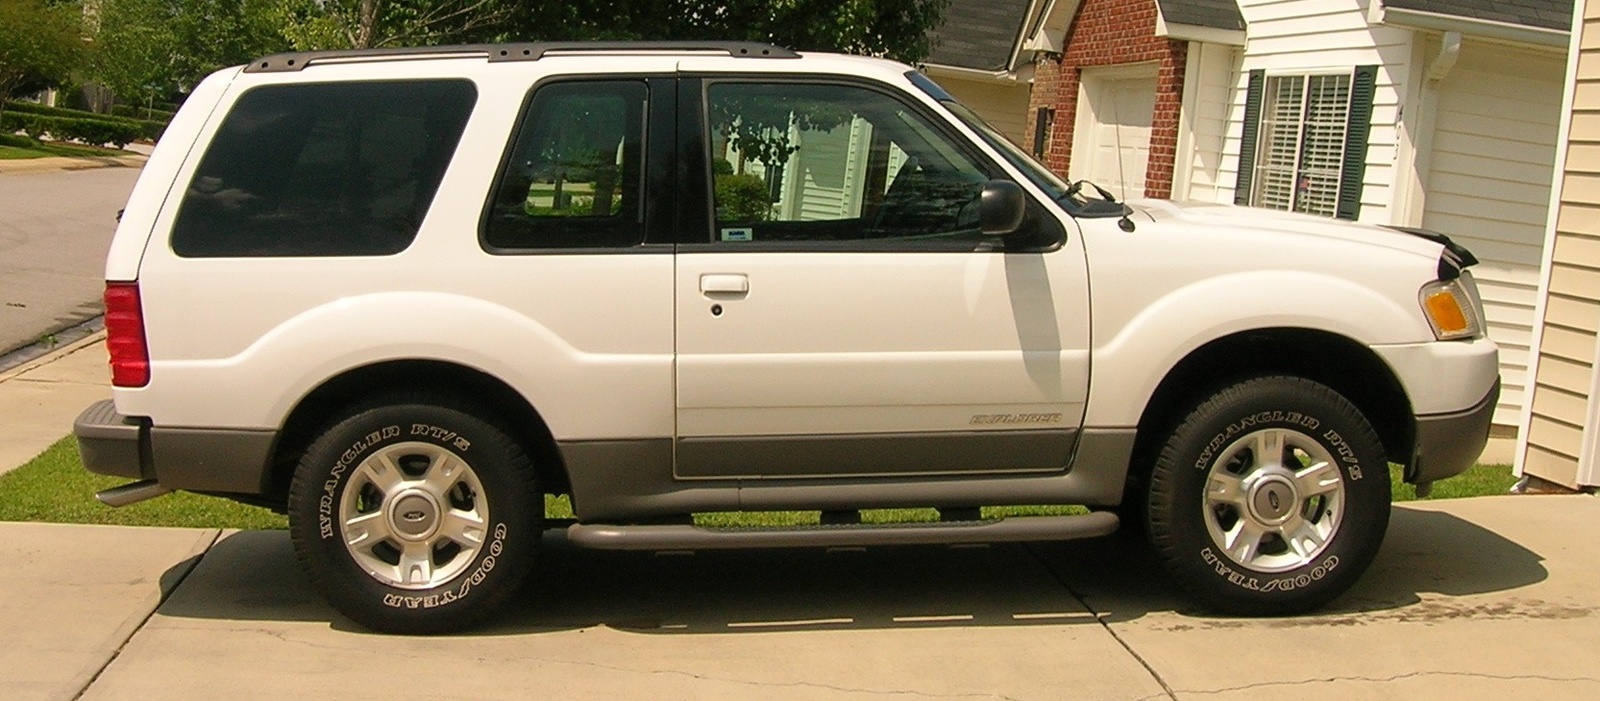 2002 Ford explorer recall notices